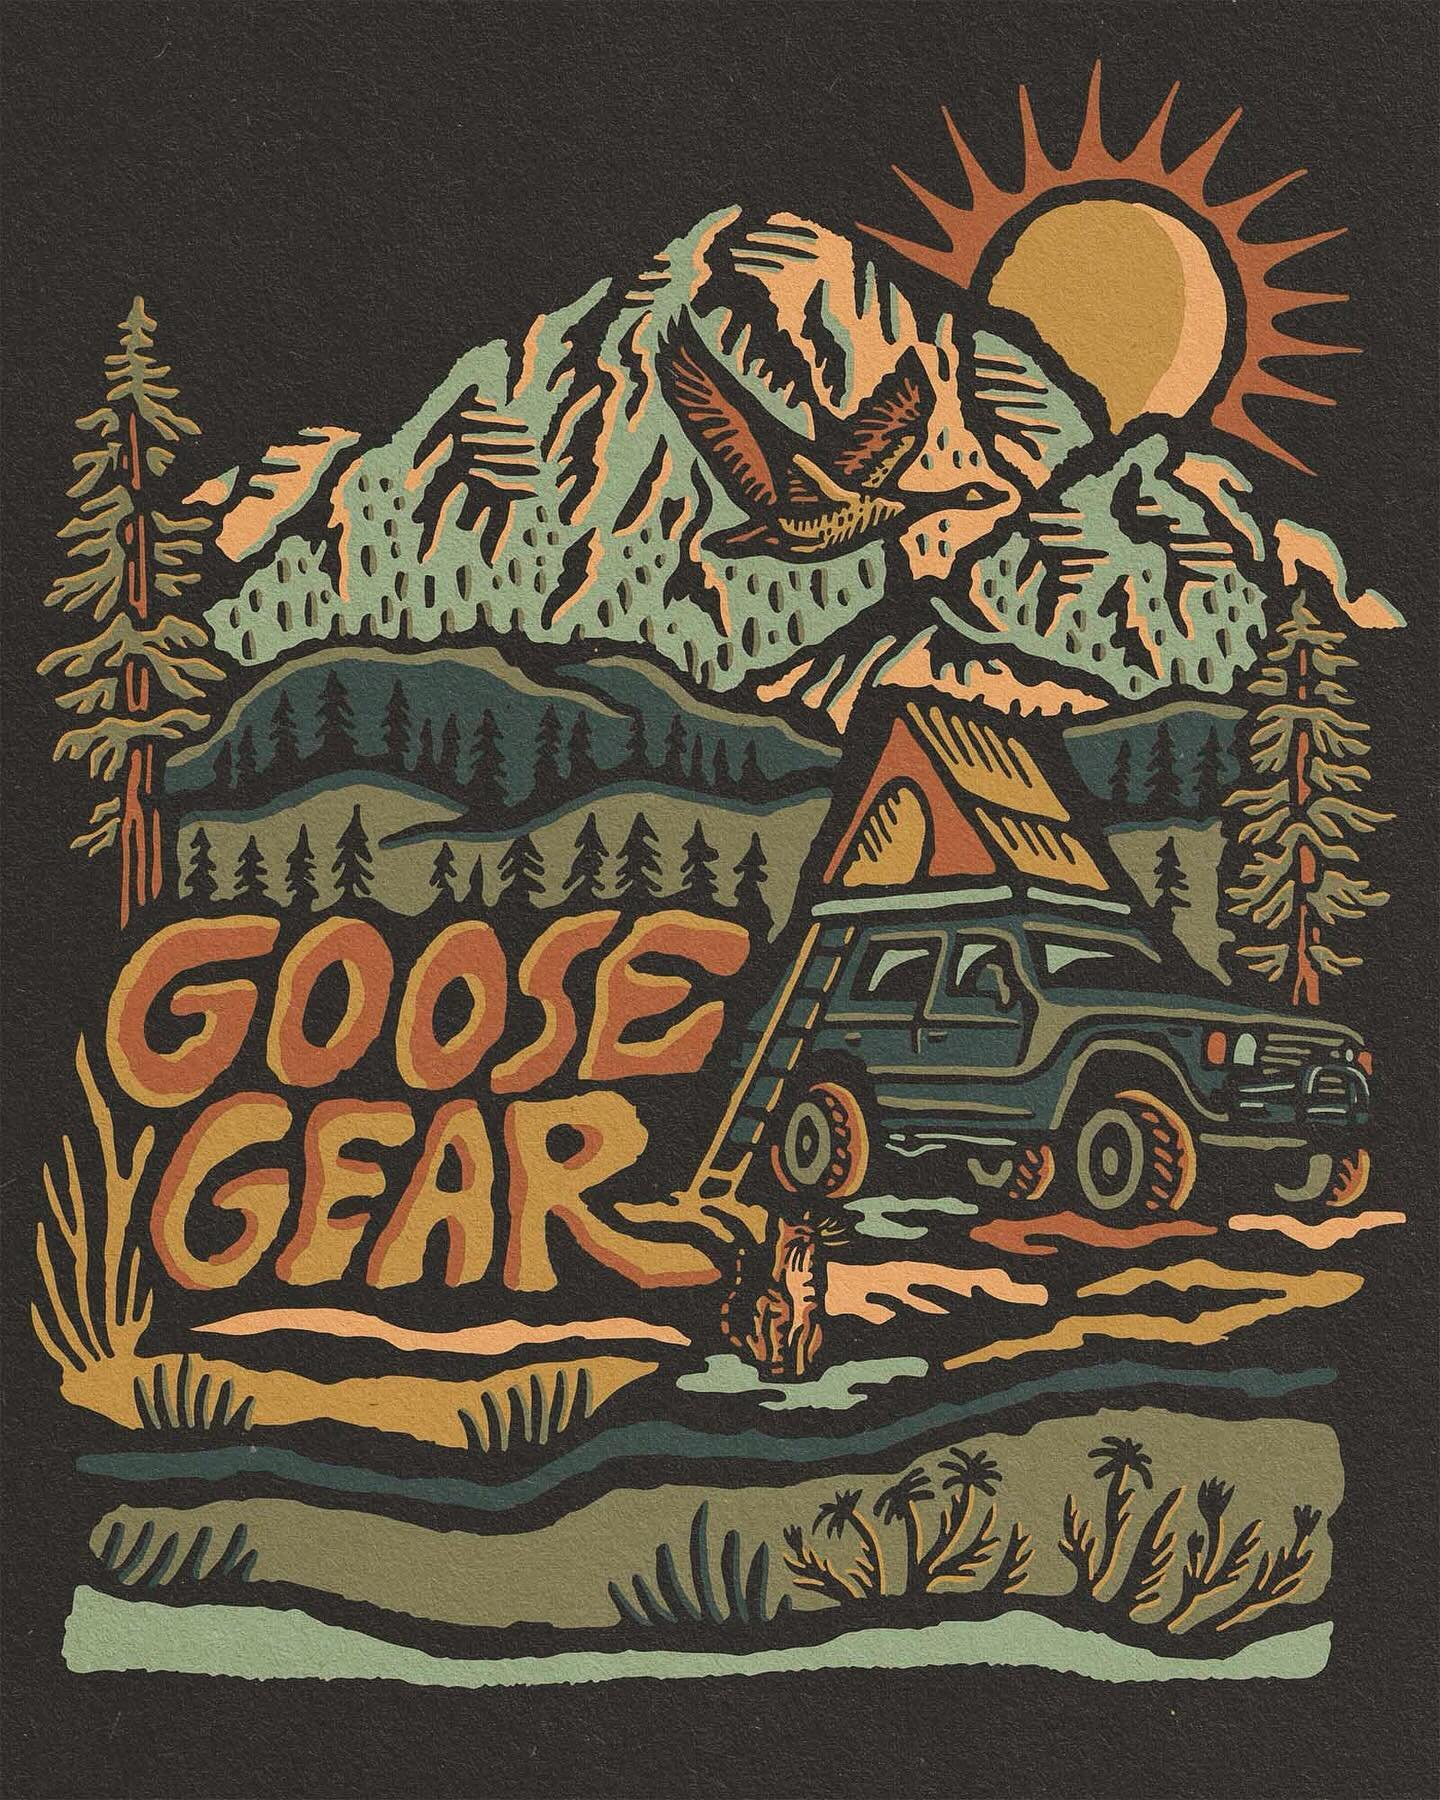 A fun one for @goosegear 🪿

I&rsquo;m 3 months booked out y&rsquo;all! Wow guys, thanks for all your support. If you want to get on my schedule, shoot me an email and we can get you set 🌞
&bull;
&bull;
&bull;
#goosegoose #adventure #adventureillust